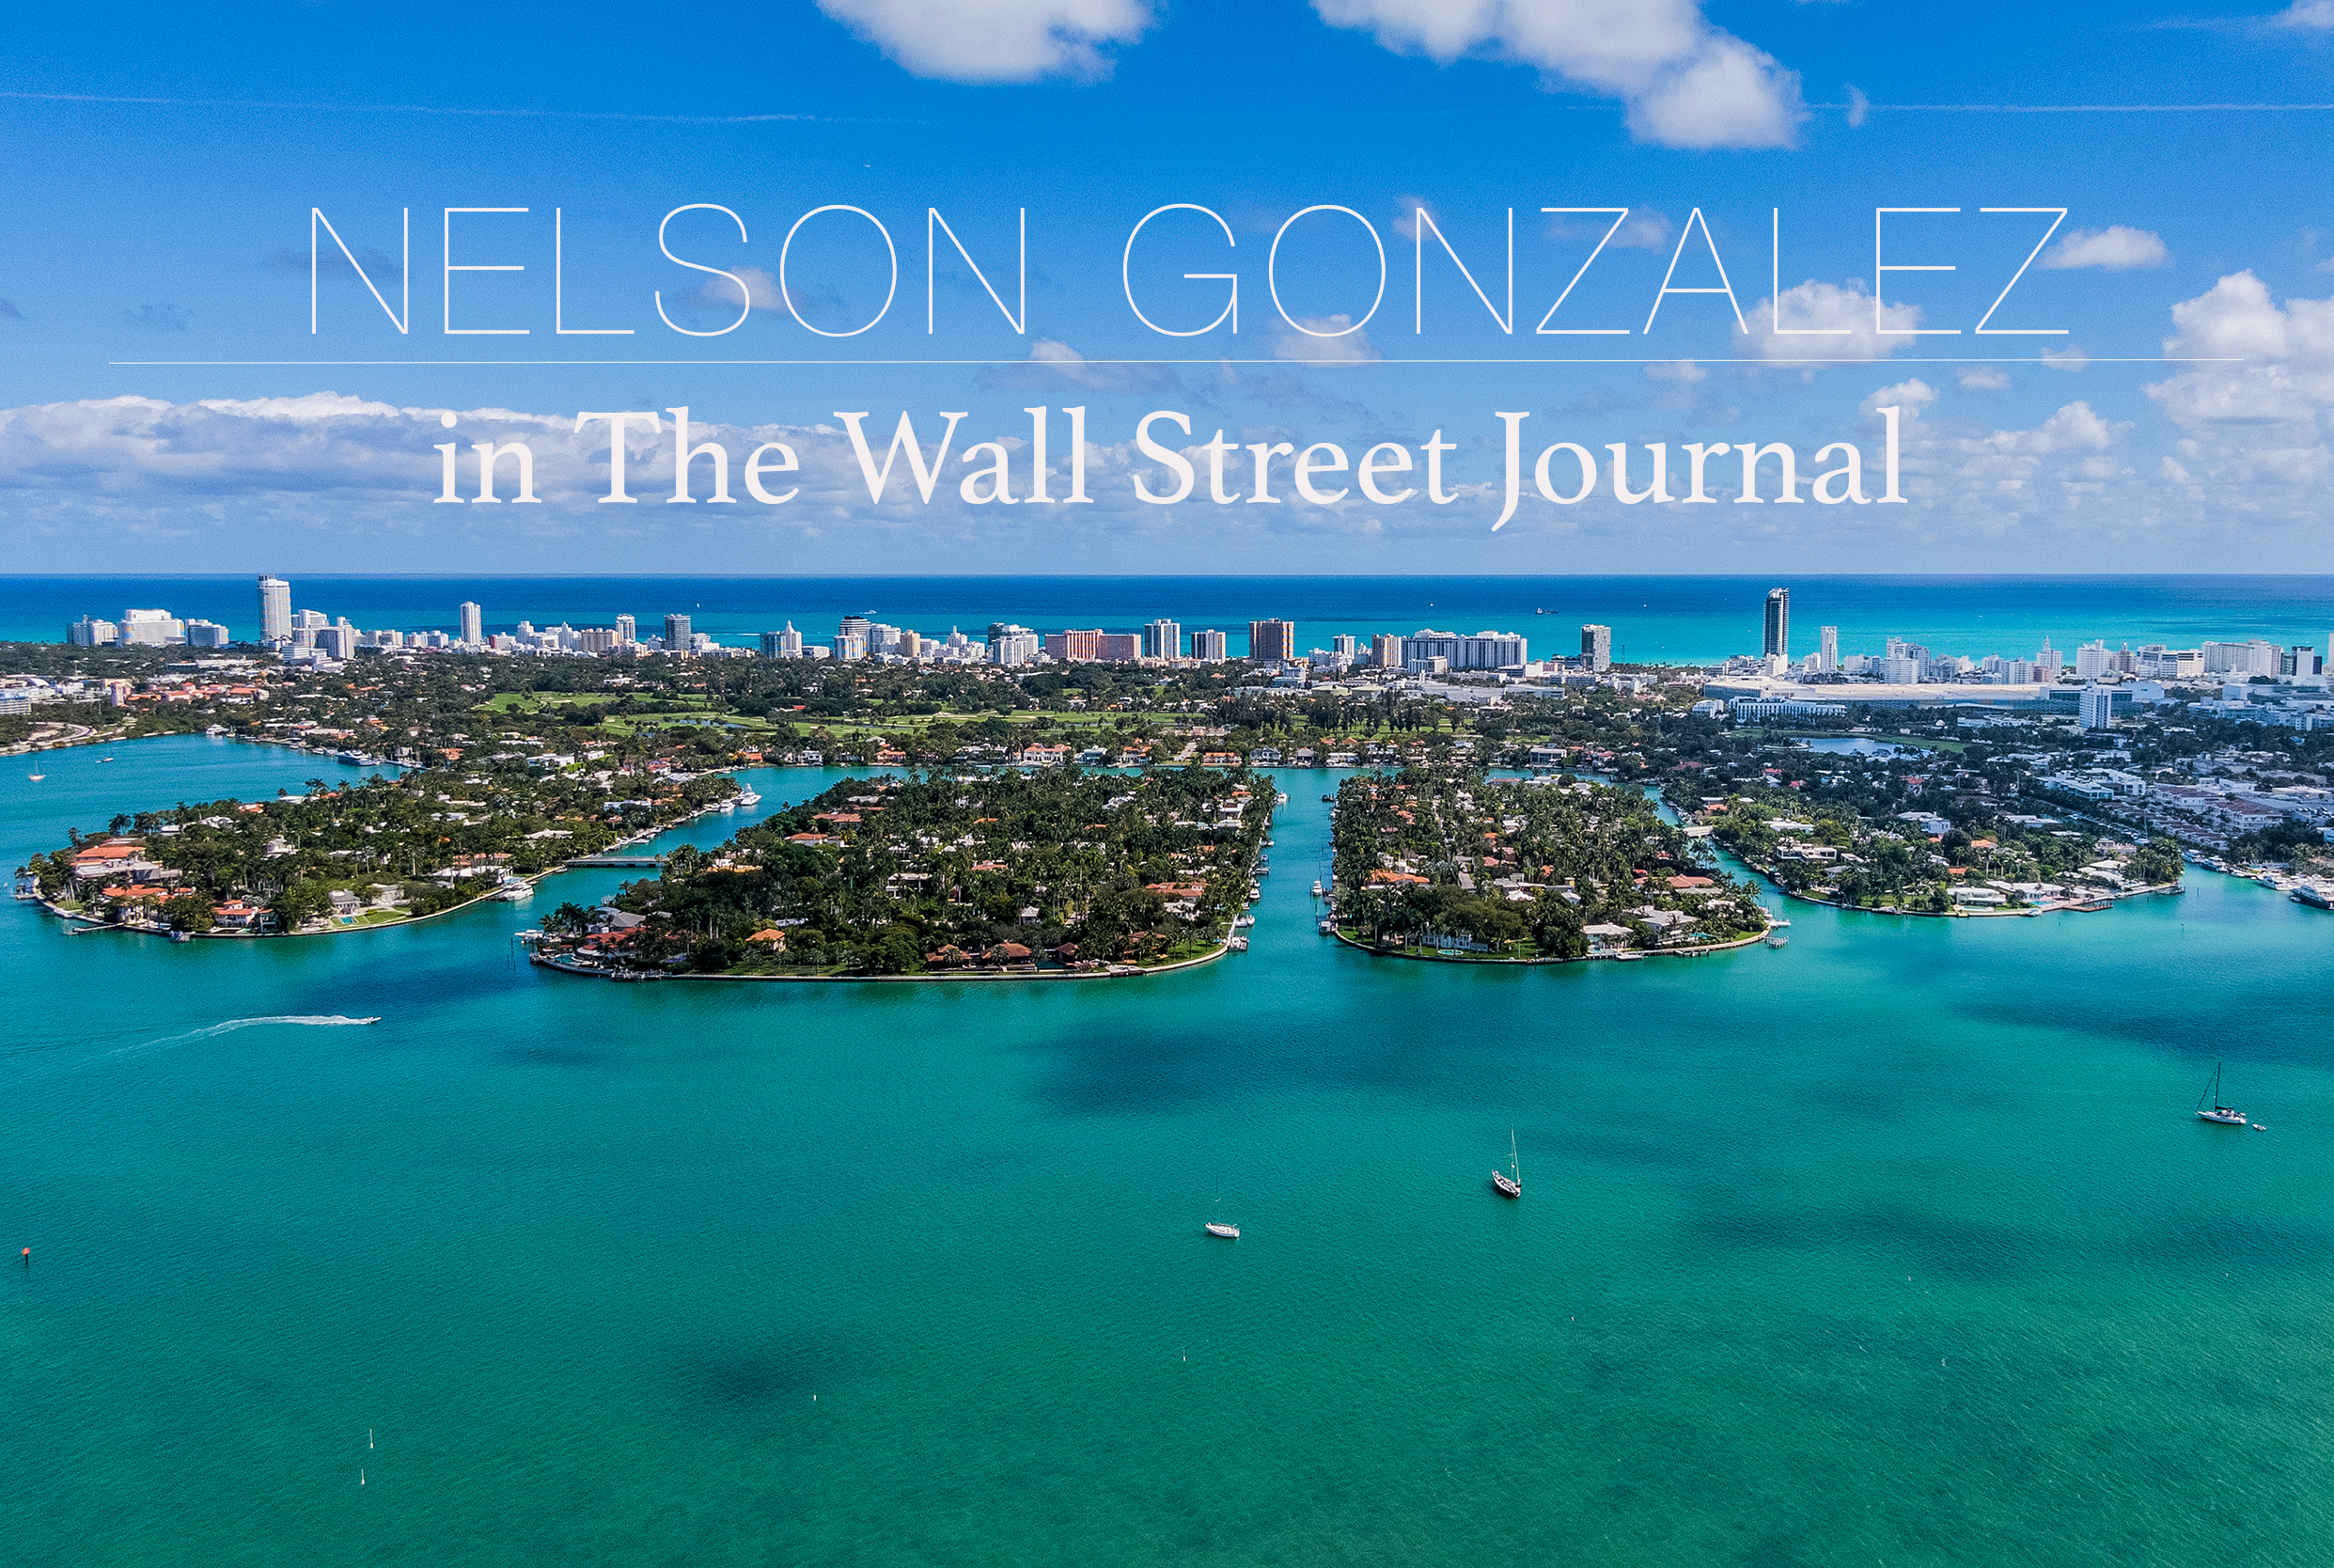 THE WSJ – Out Of State Buyers Move To Miami – The WSJ Article Where Nelson Gonzalez Was Interviewed